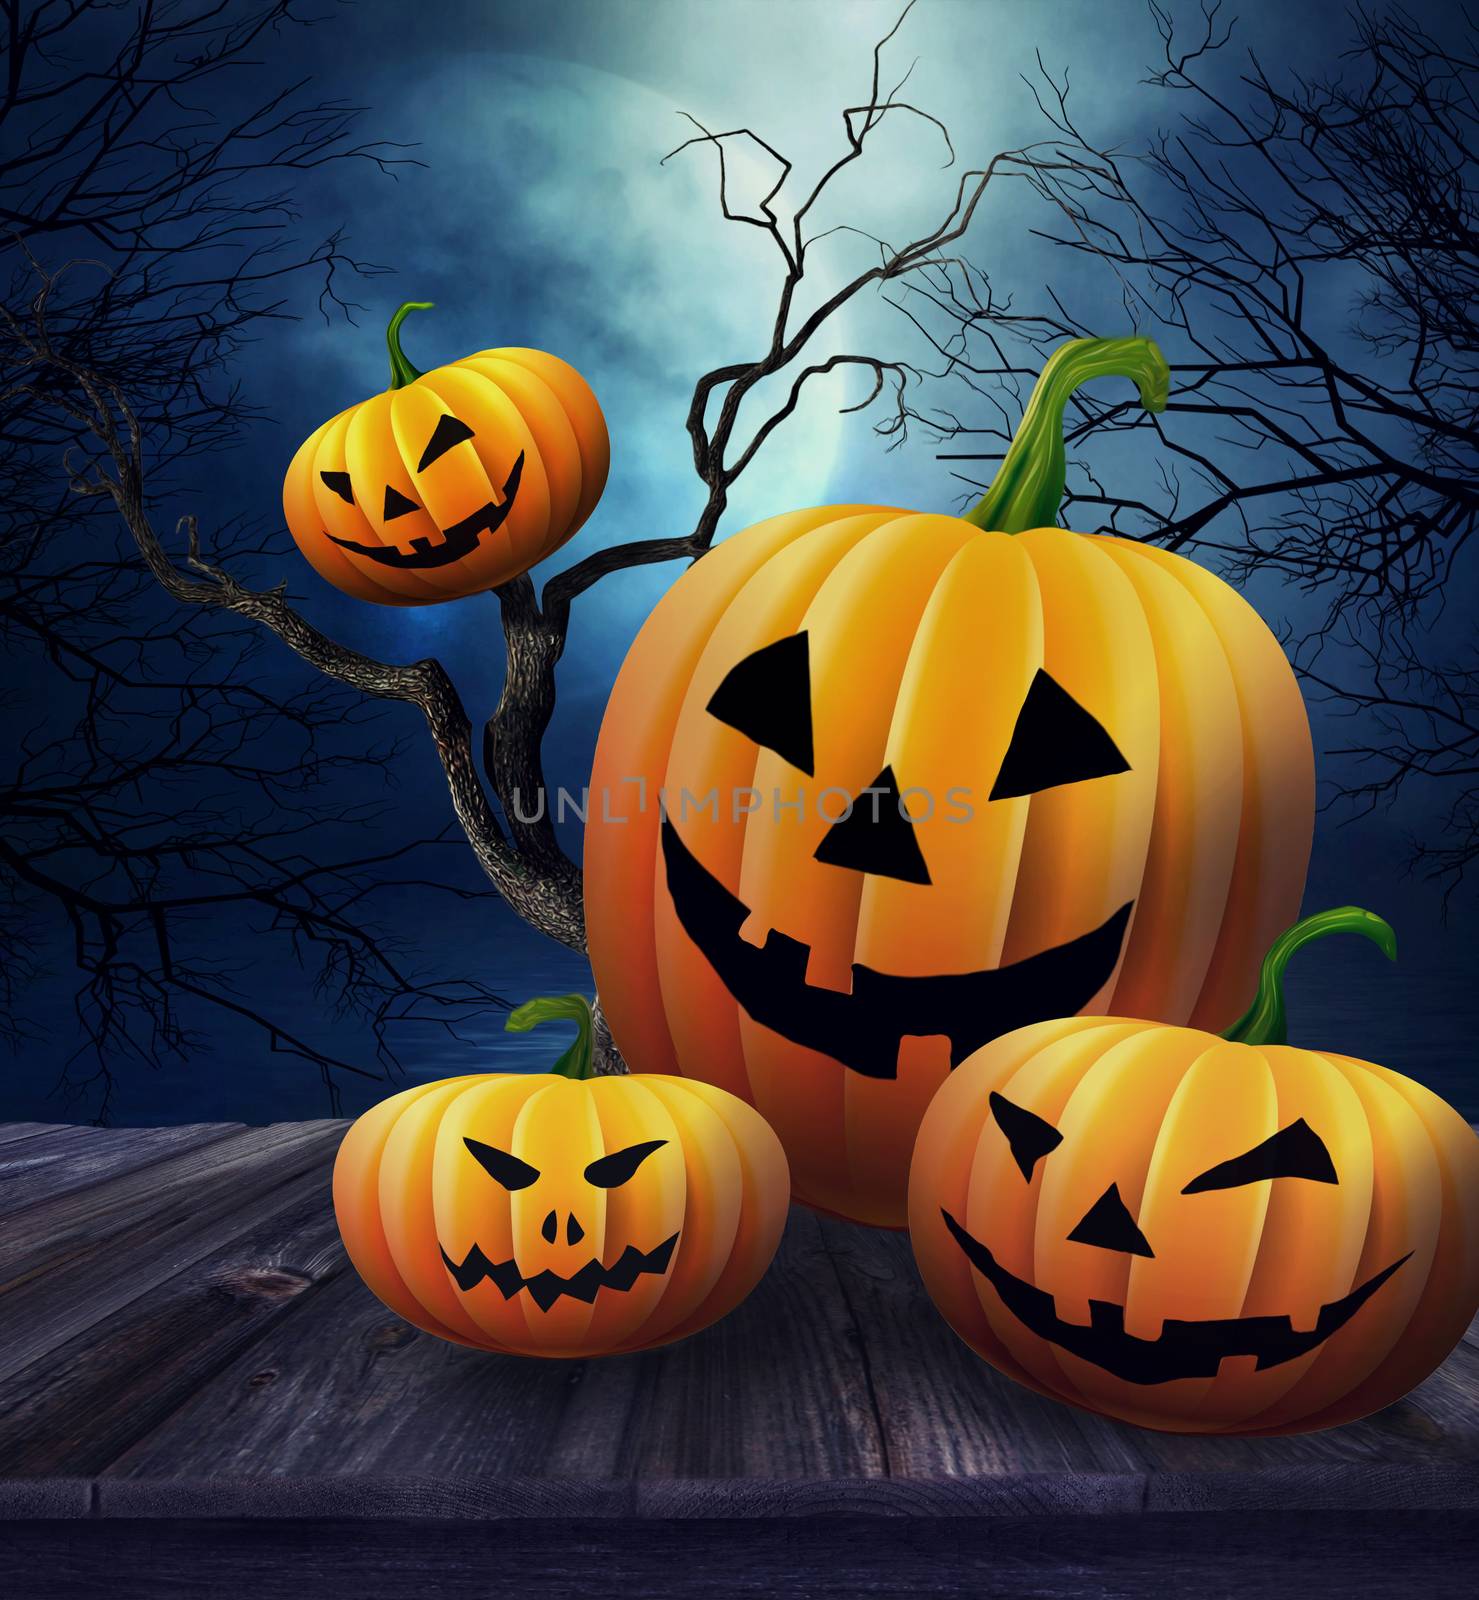 Pumpkins on wooden table  with Halloween background